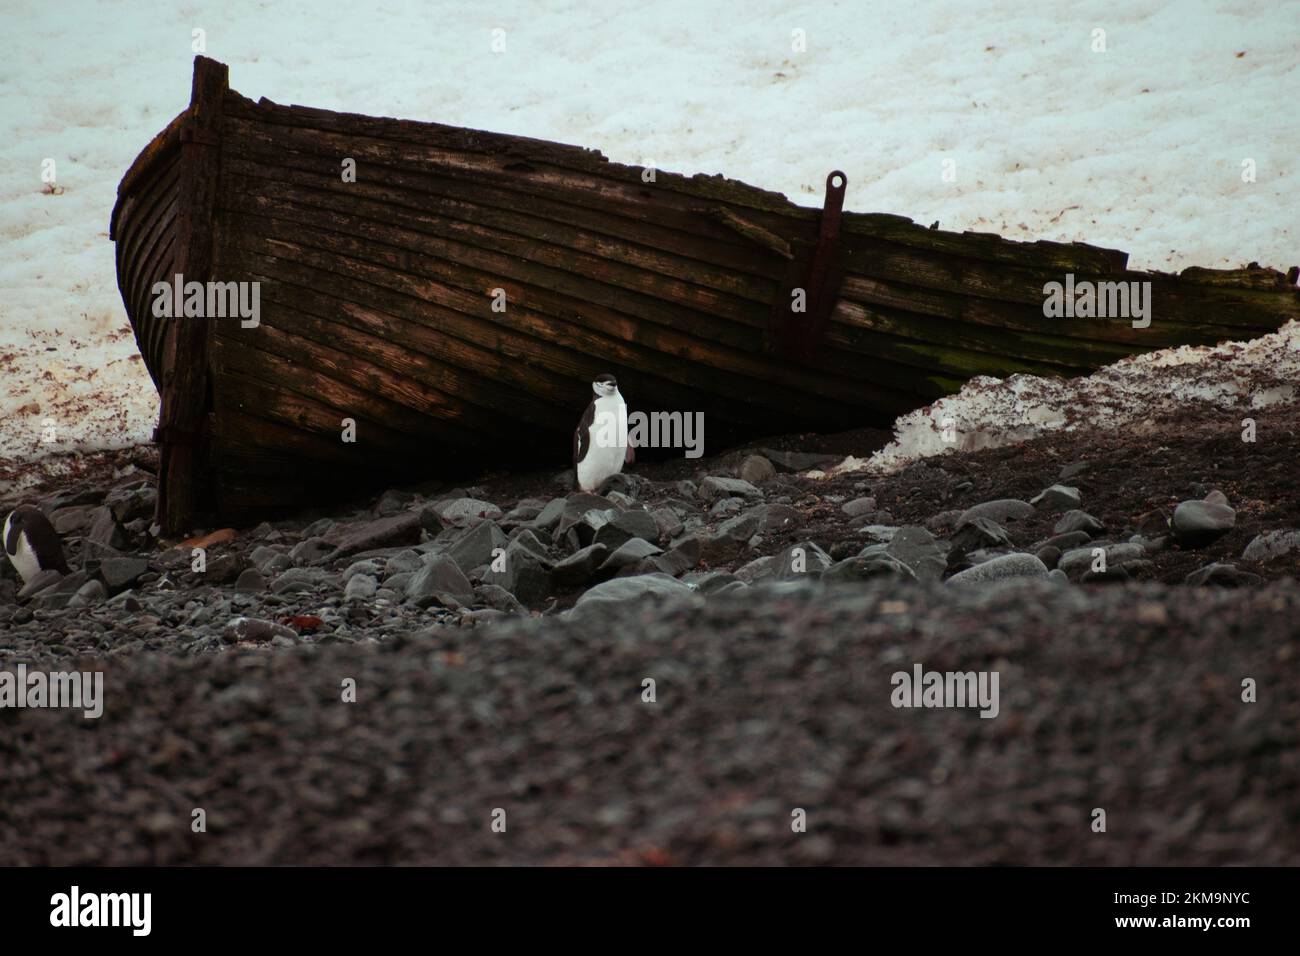 Chinstrap Penguin standing near an old wood whaling boat.  On deception island during spring in Antarctica. Stock Photo